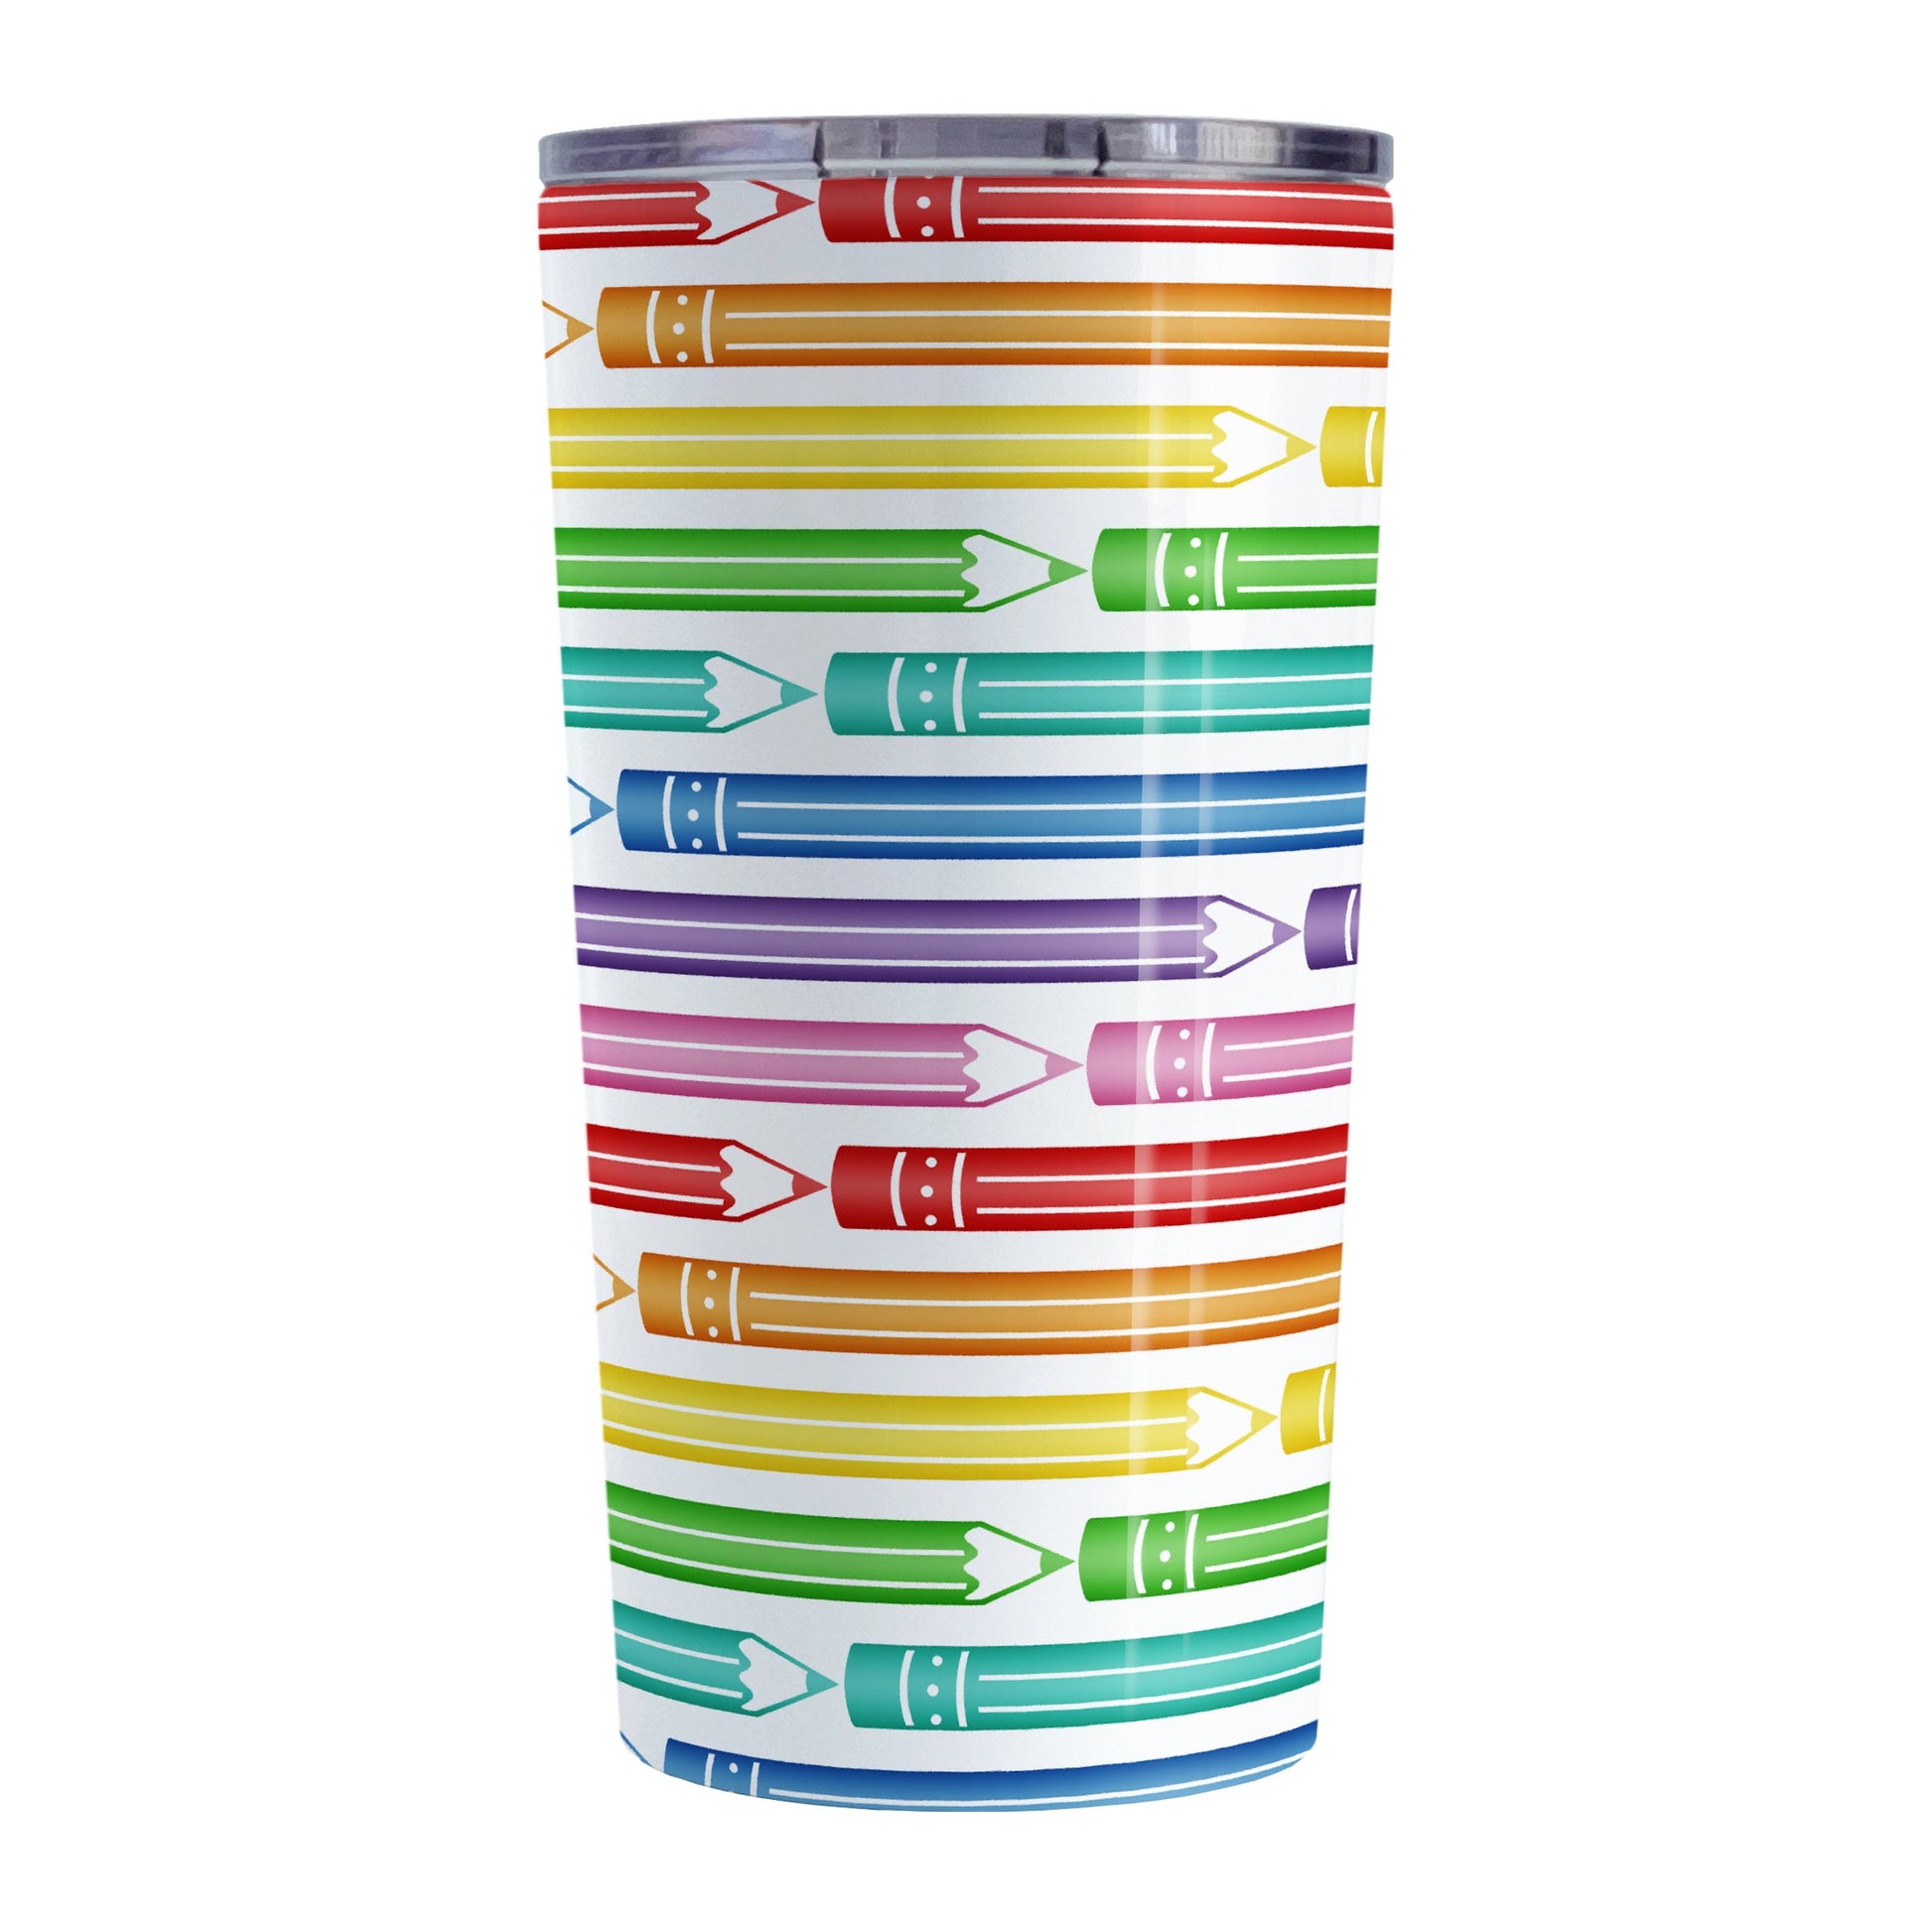 Colored Pencils Pattern Tumbler Cup (20oz) at Amy's Coffee Mugs. A stainless steel insulated tumbler cup designed with a pattern of colored pencils in stacked rows, in a rainbow progression, that wraps around the cup.